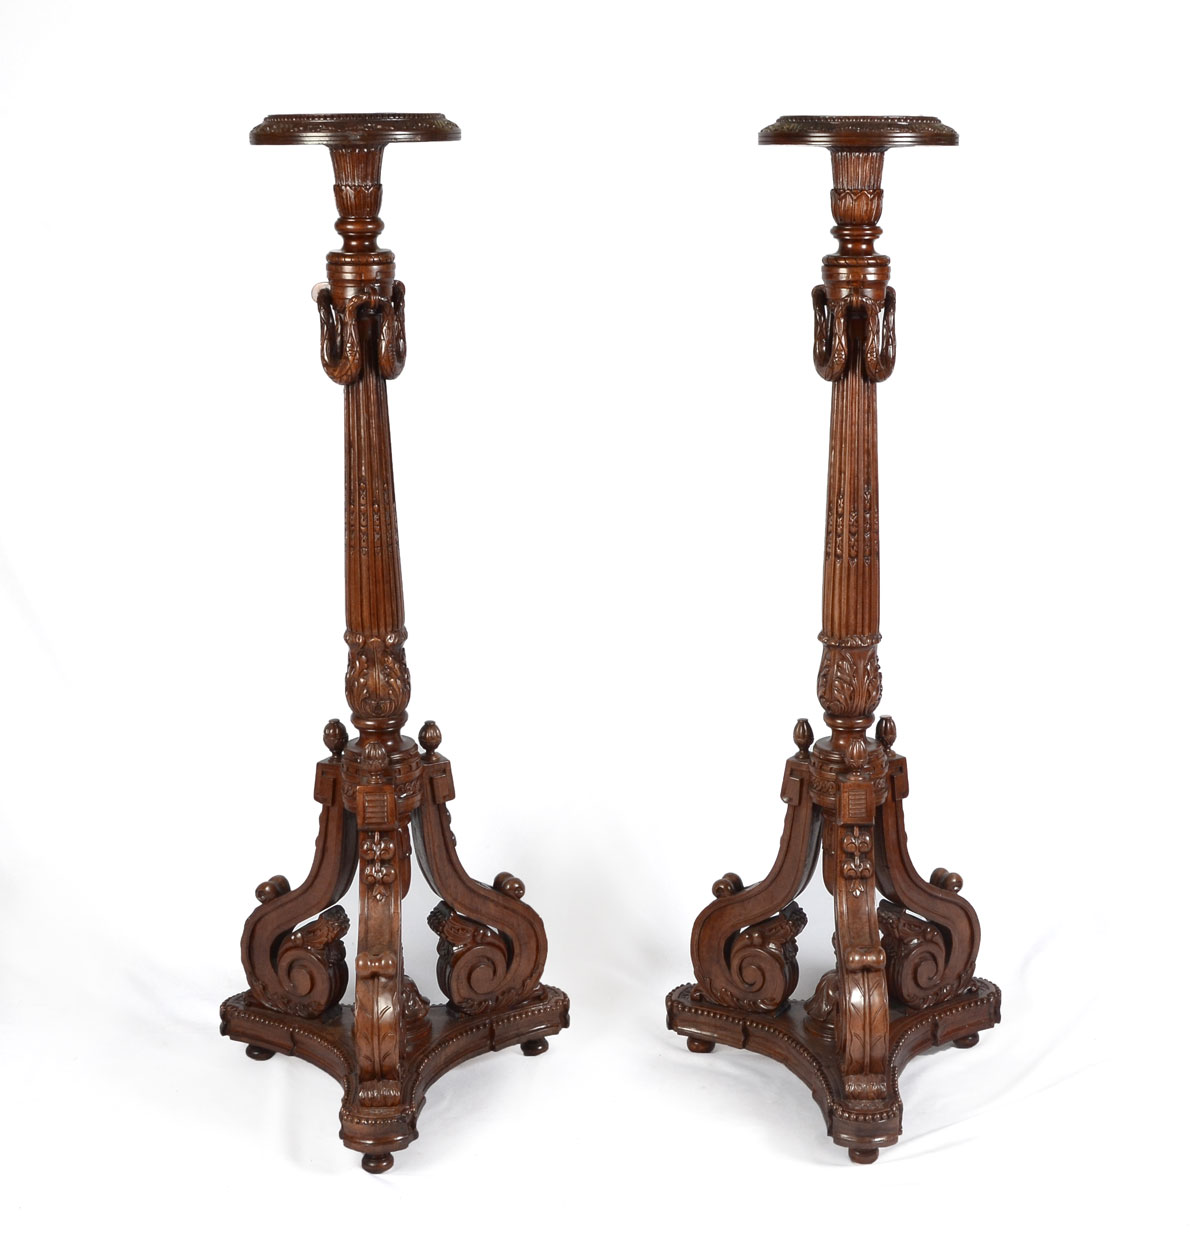 PAIR CARVED MAHOGANY FERN STANDS: